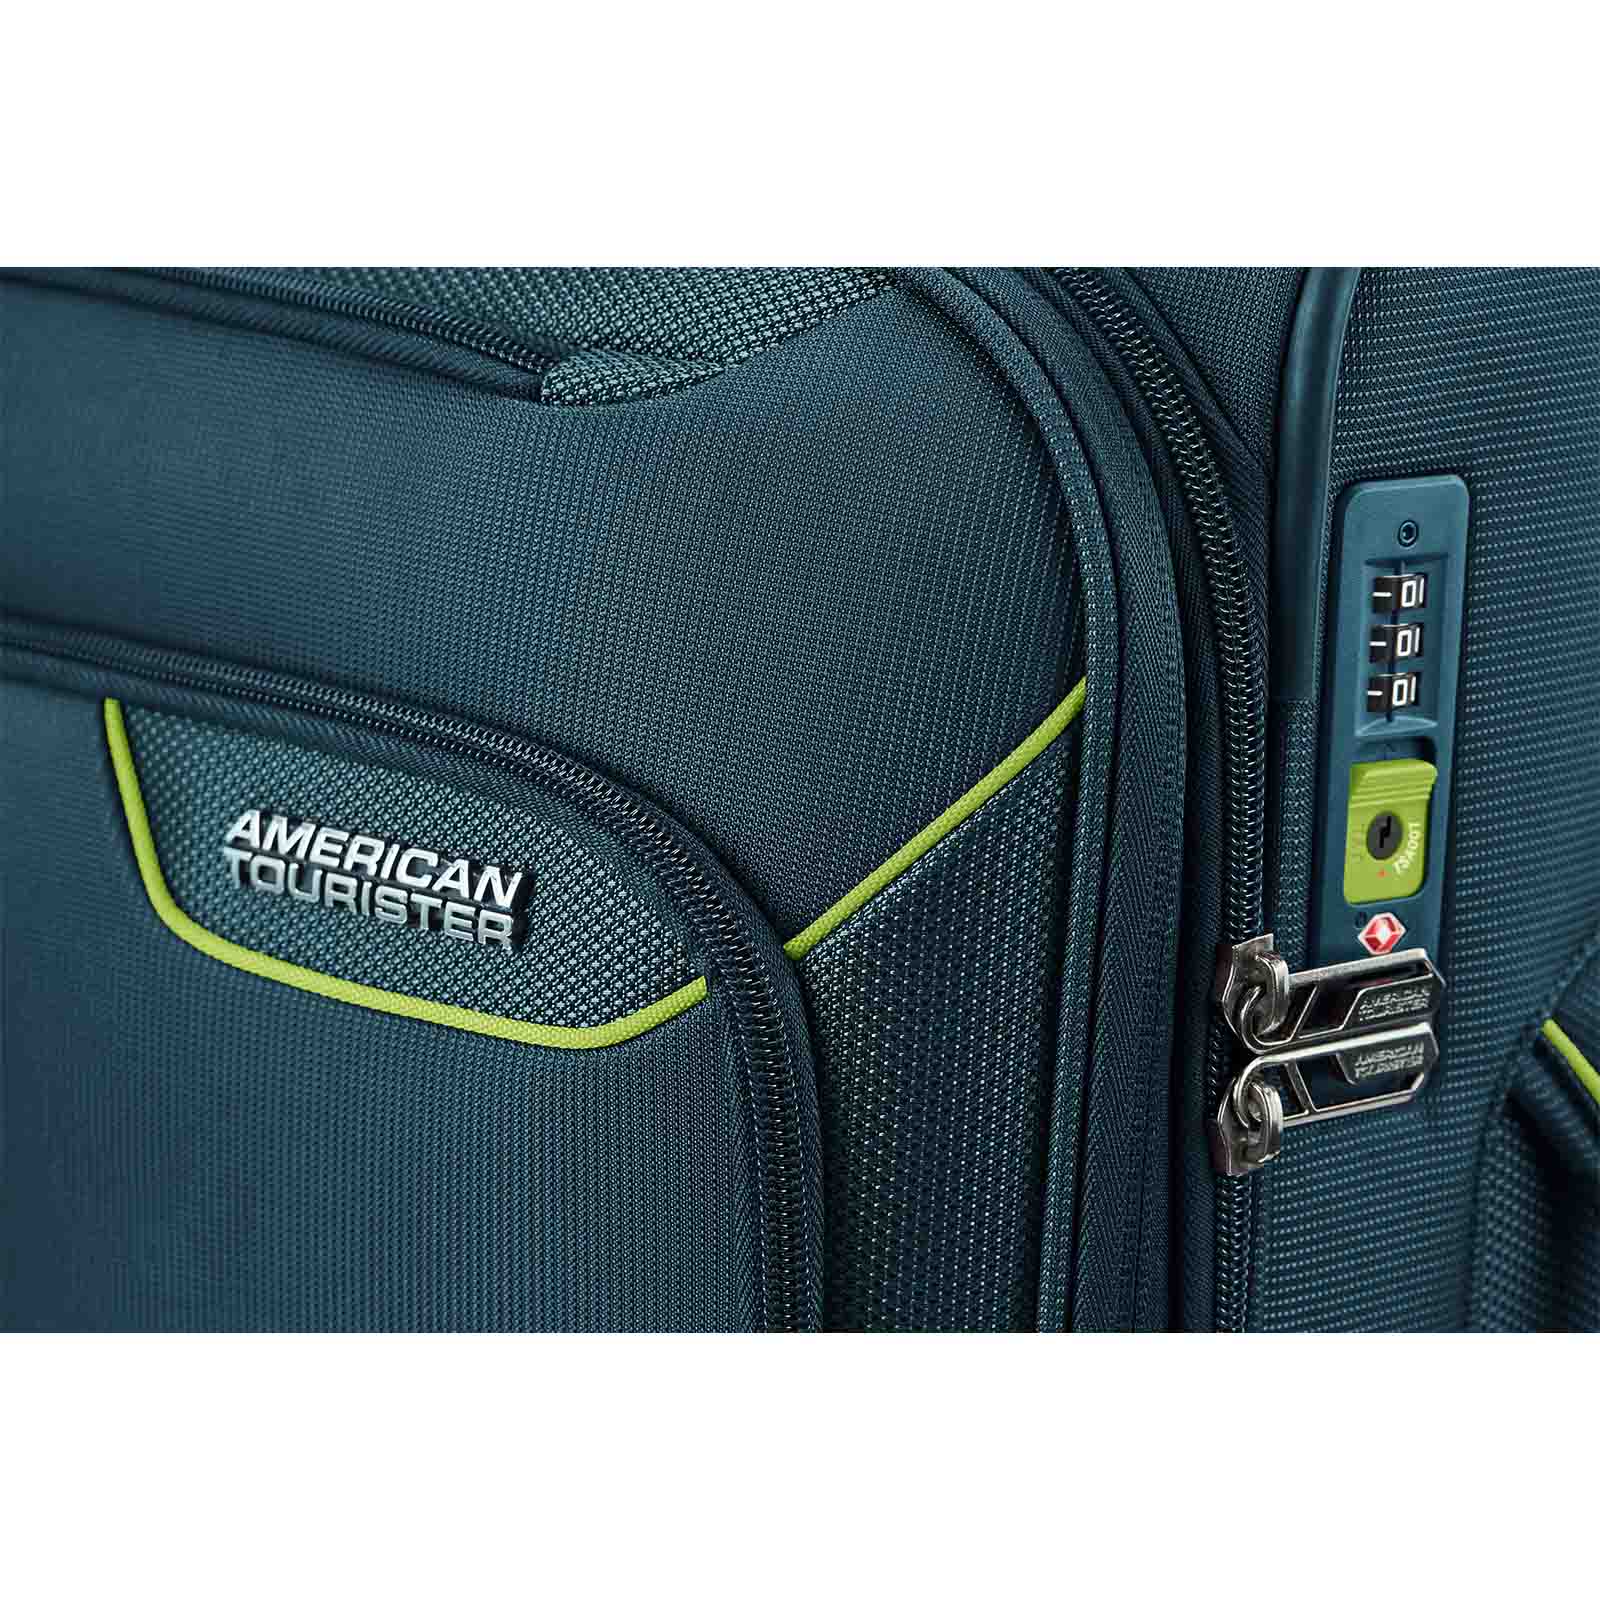 American-Tourister-Applite-4-Eco-55cm-Carry-On-Suitcase-Varsity-Green-Lock